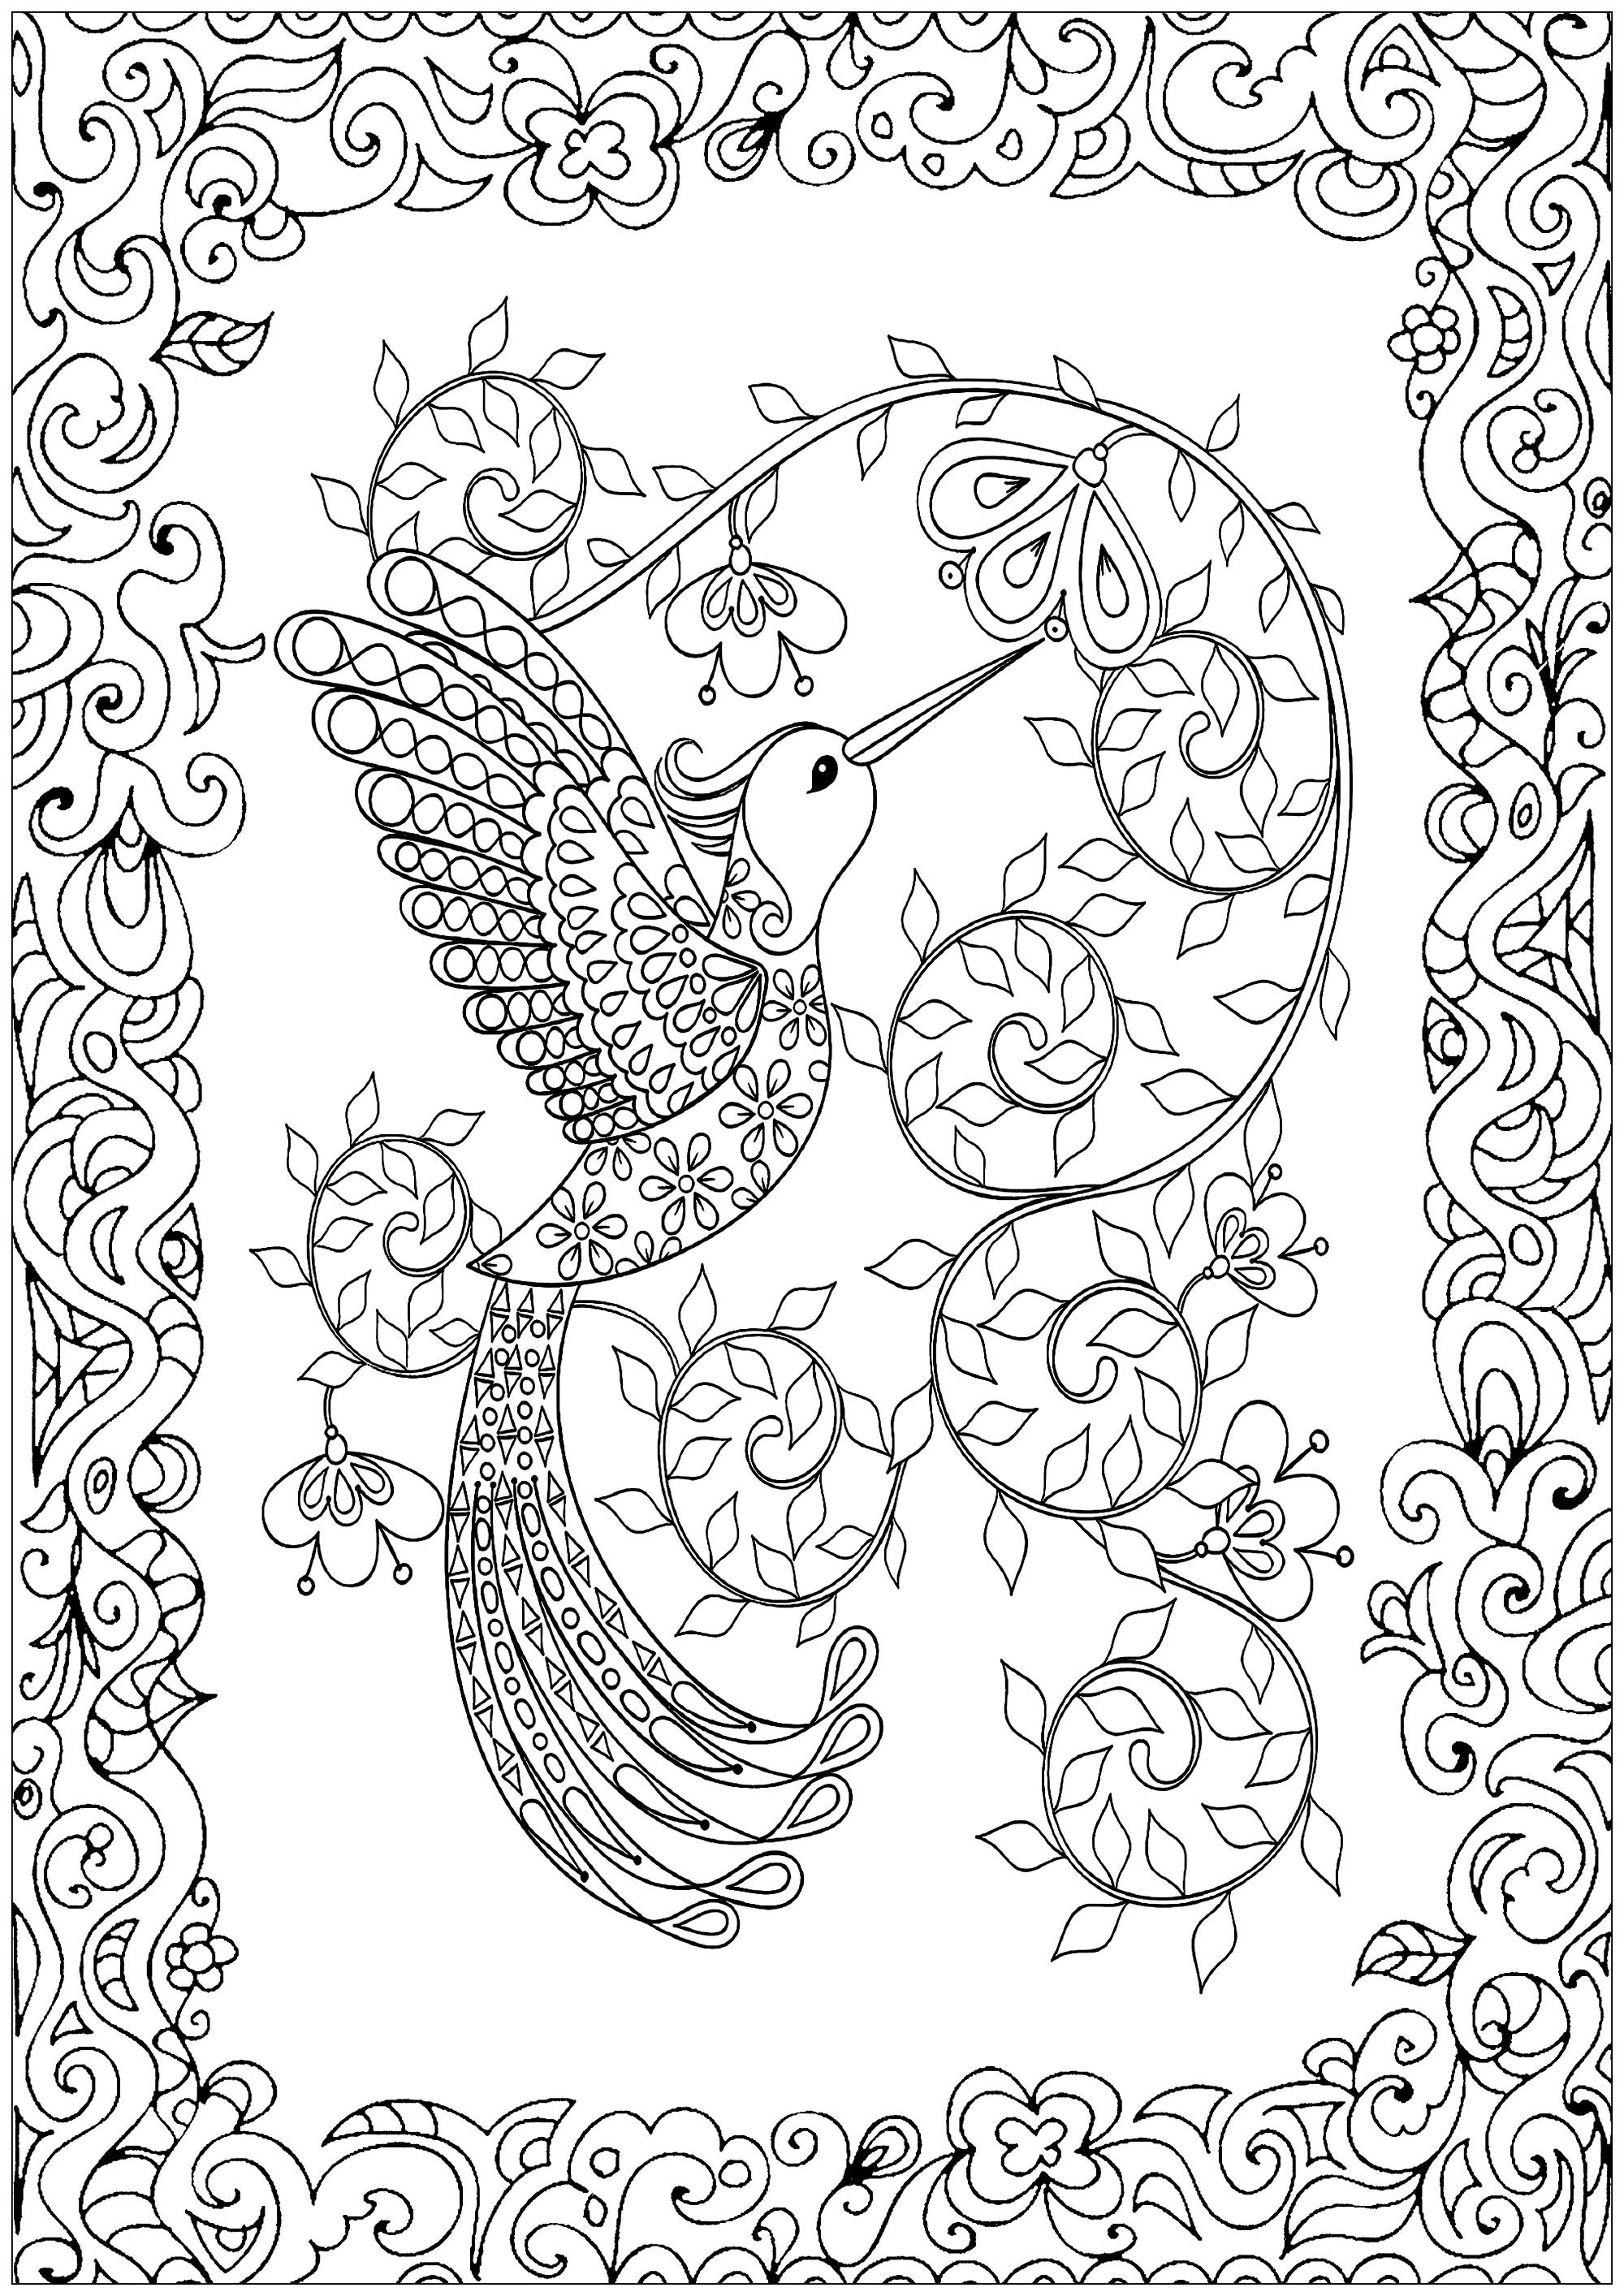 Download Humming bird - Birds Adult Coloring Pages